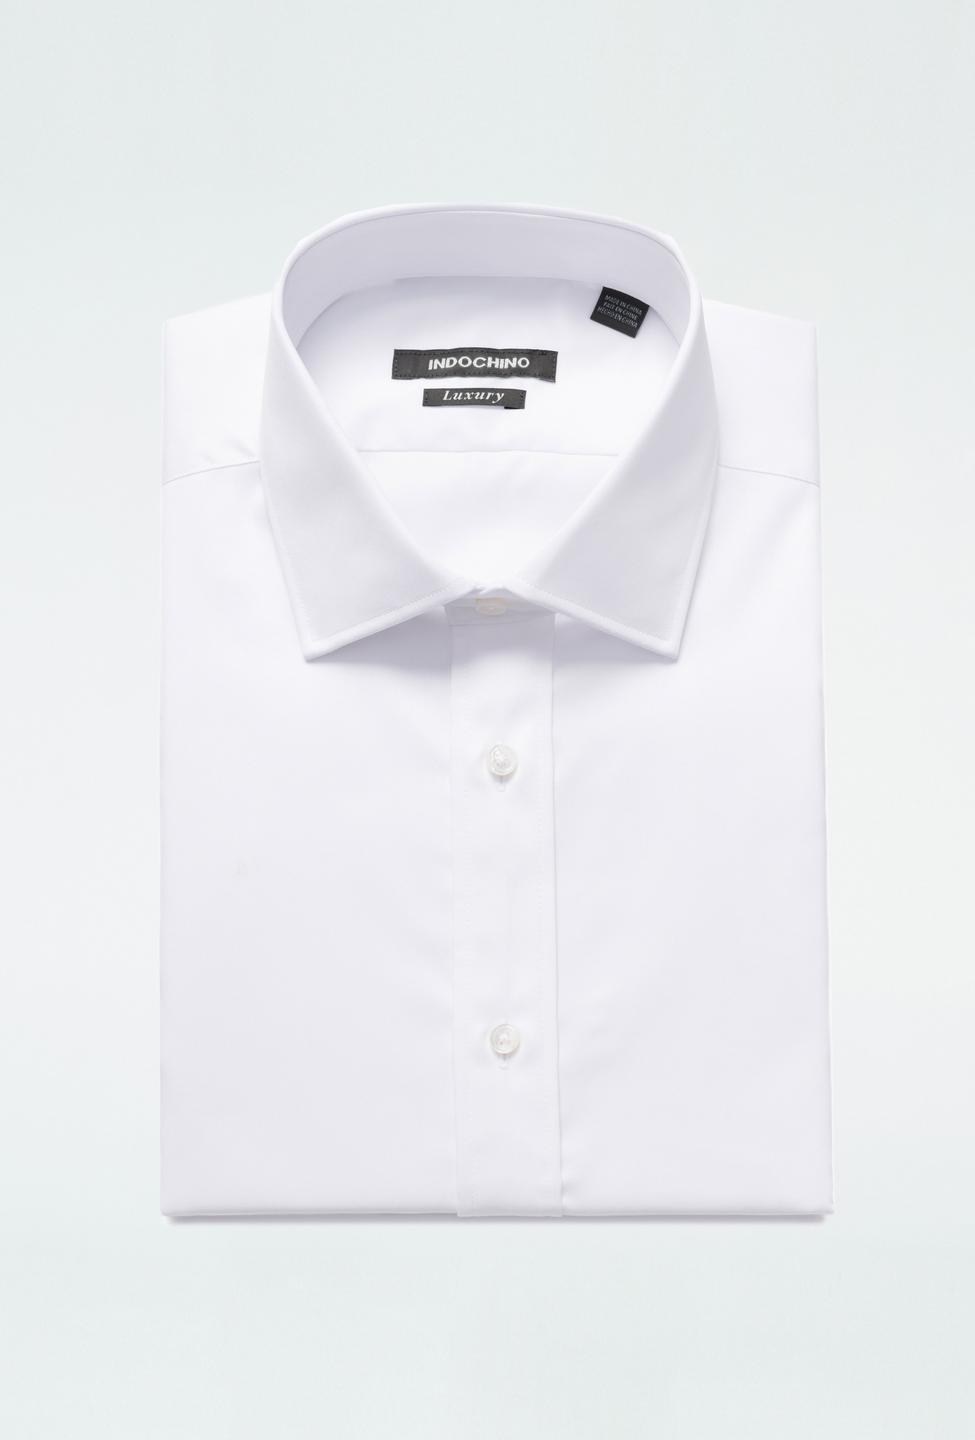 White shirt - Hyde Solid Design from Luxury Indochino Collection